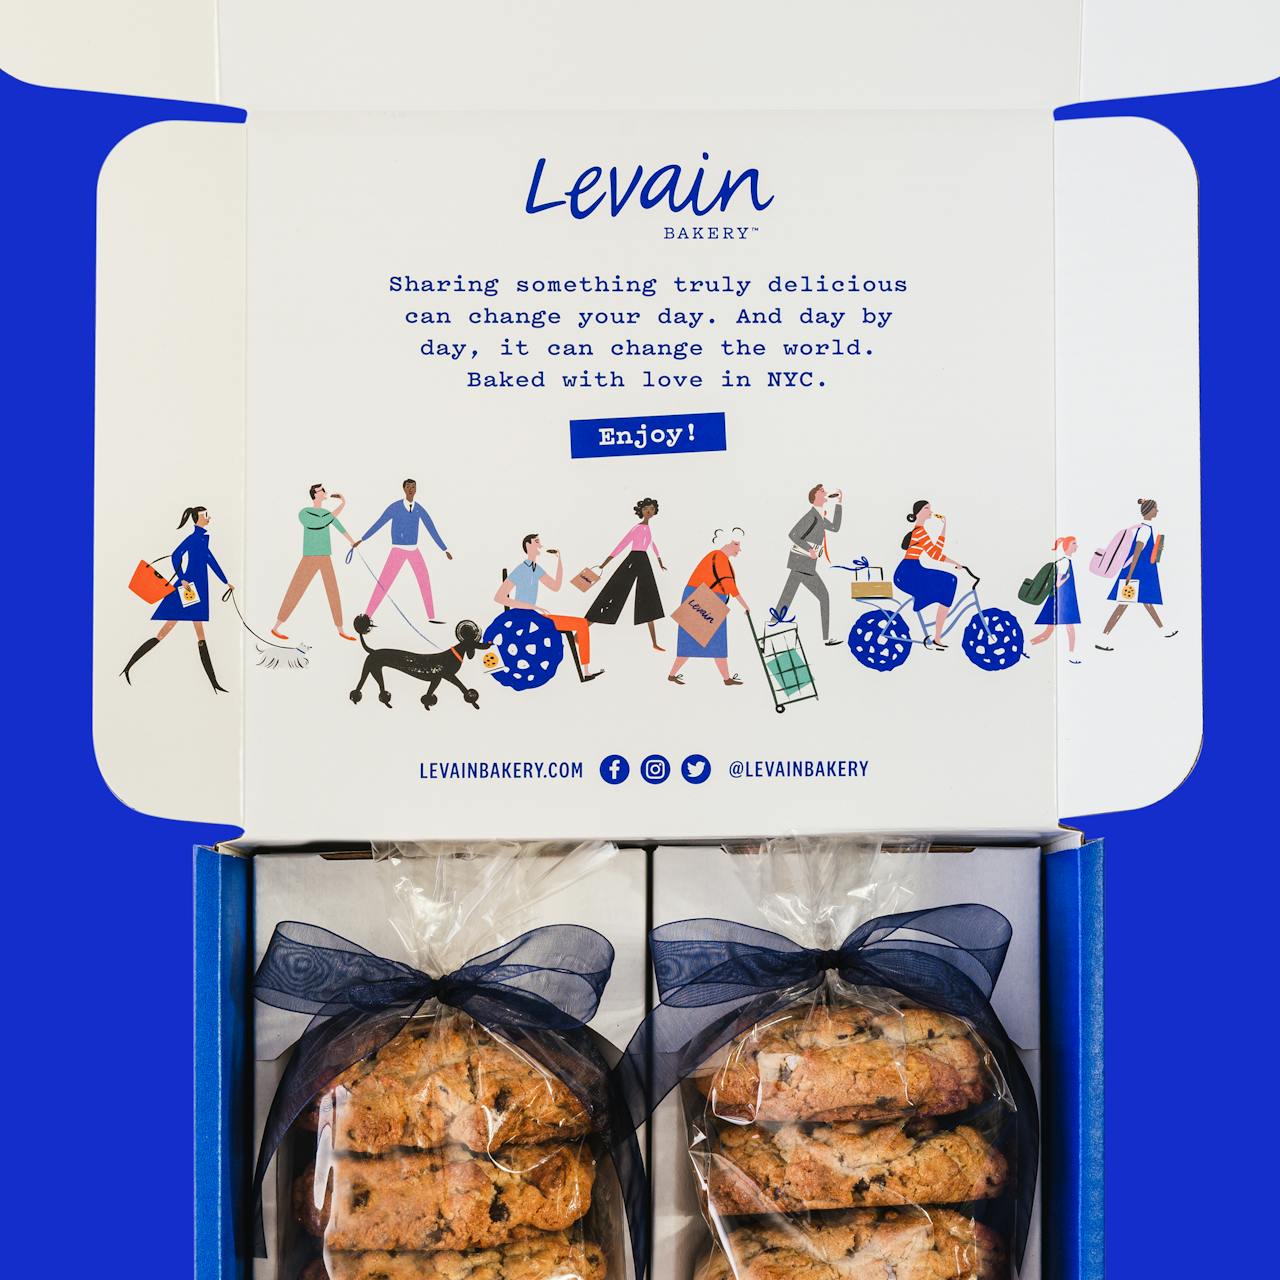 Levain Bakery’s e-comm packaging features a “cookie lover’s parade” illustration that includes a variety of characters of different ages, abilities, ethnicities, and genders.